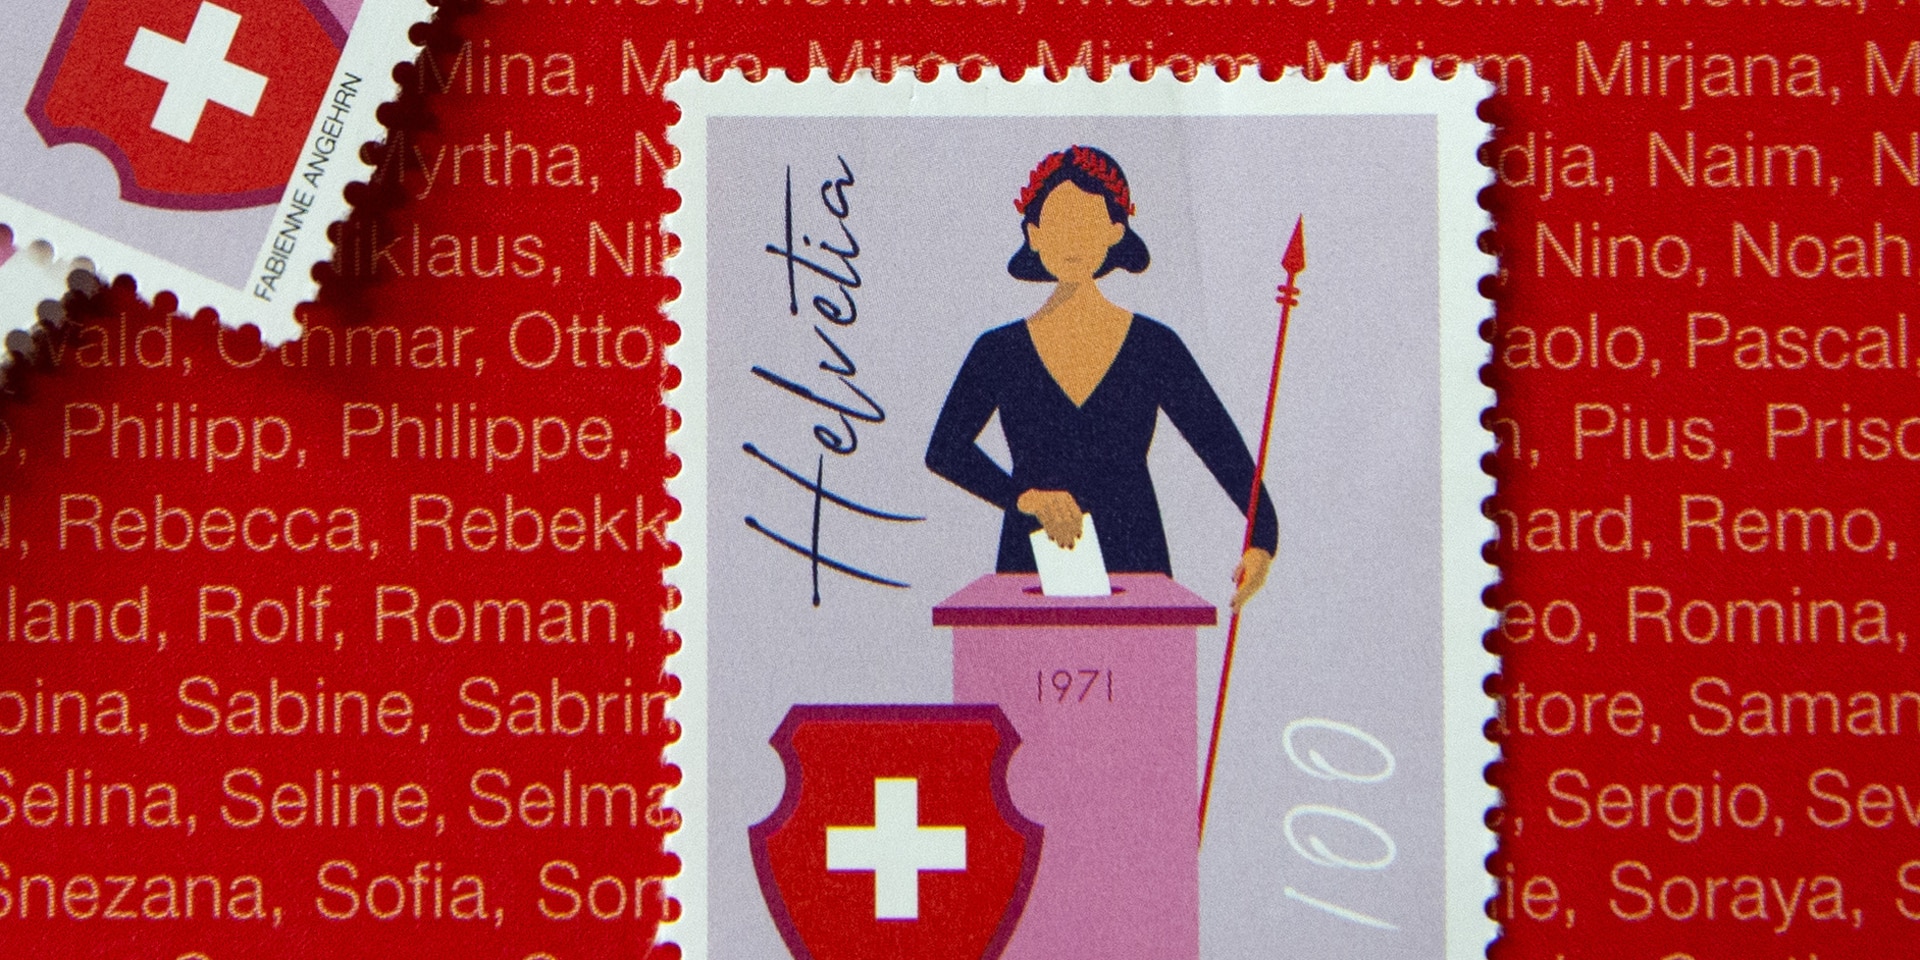 A Swiss stamp issued to mark 50 years of Swiss women obtaining the right to vote and stand for election.